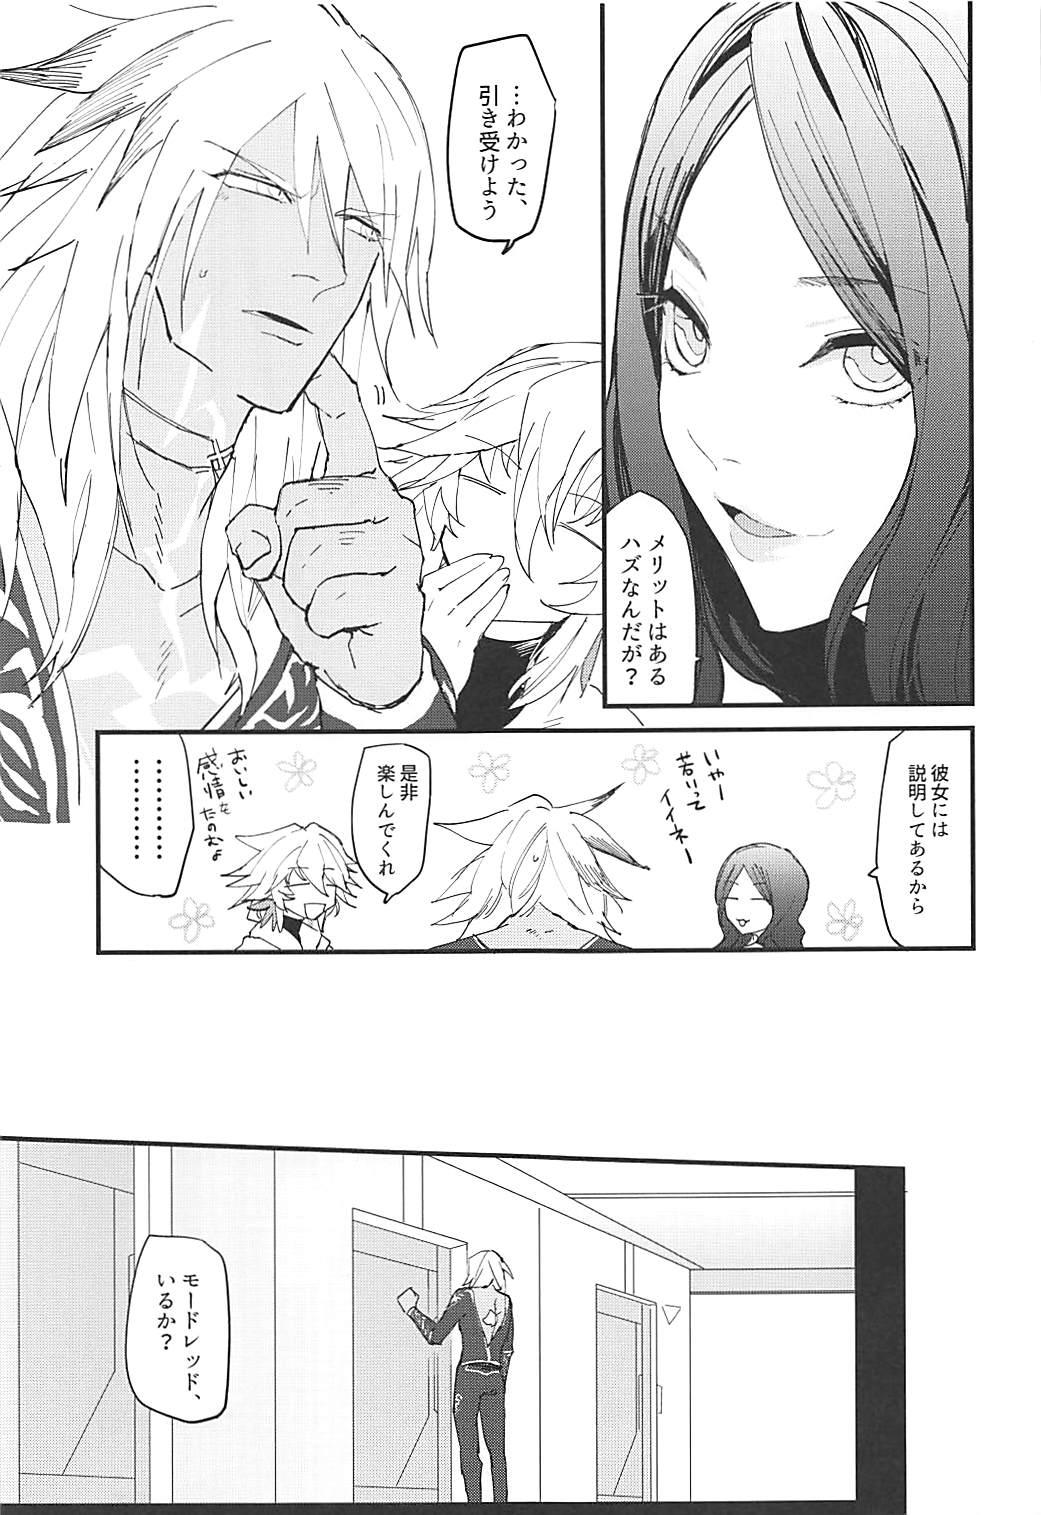 Pornstar THE WARRIORS' REST - Fate grand order Dad - Page 5